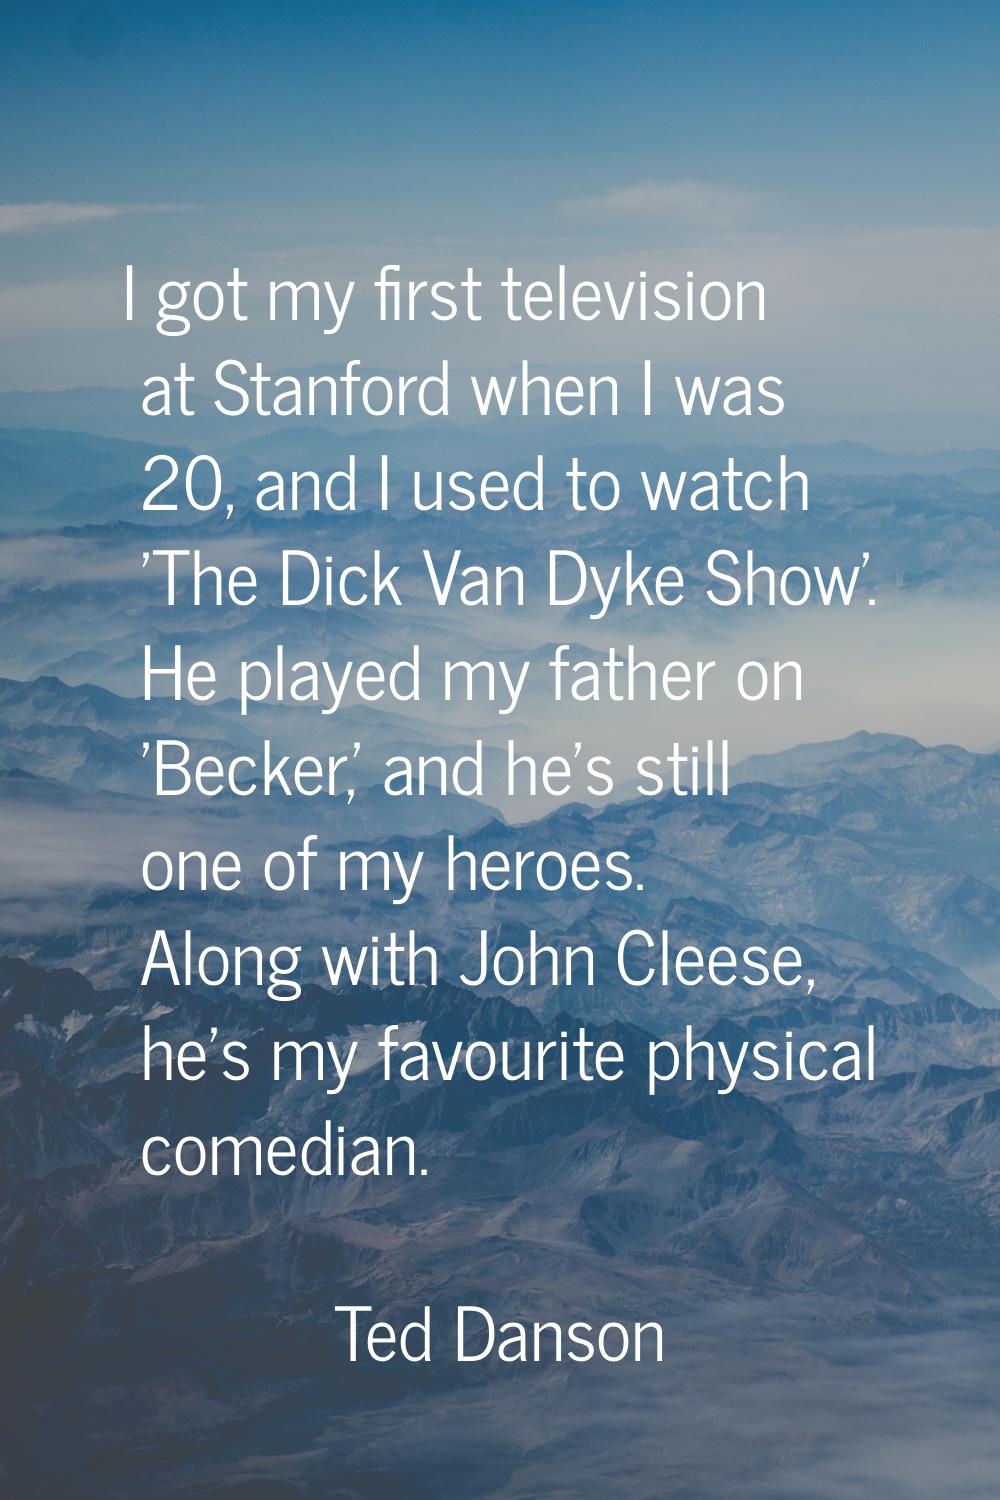 I got my first television at Stanford when I was 20, and I used to watch 'The Dick Van Dyke Show'. 